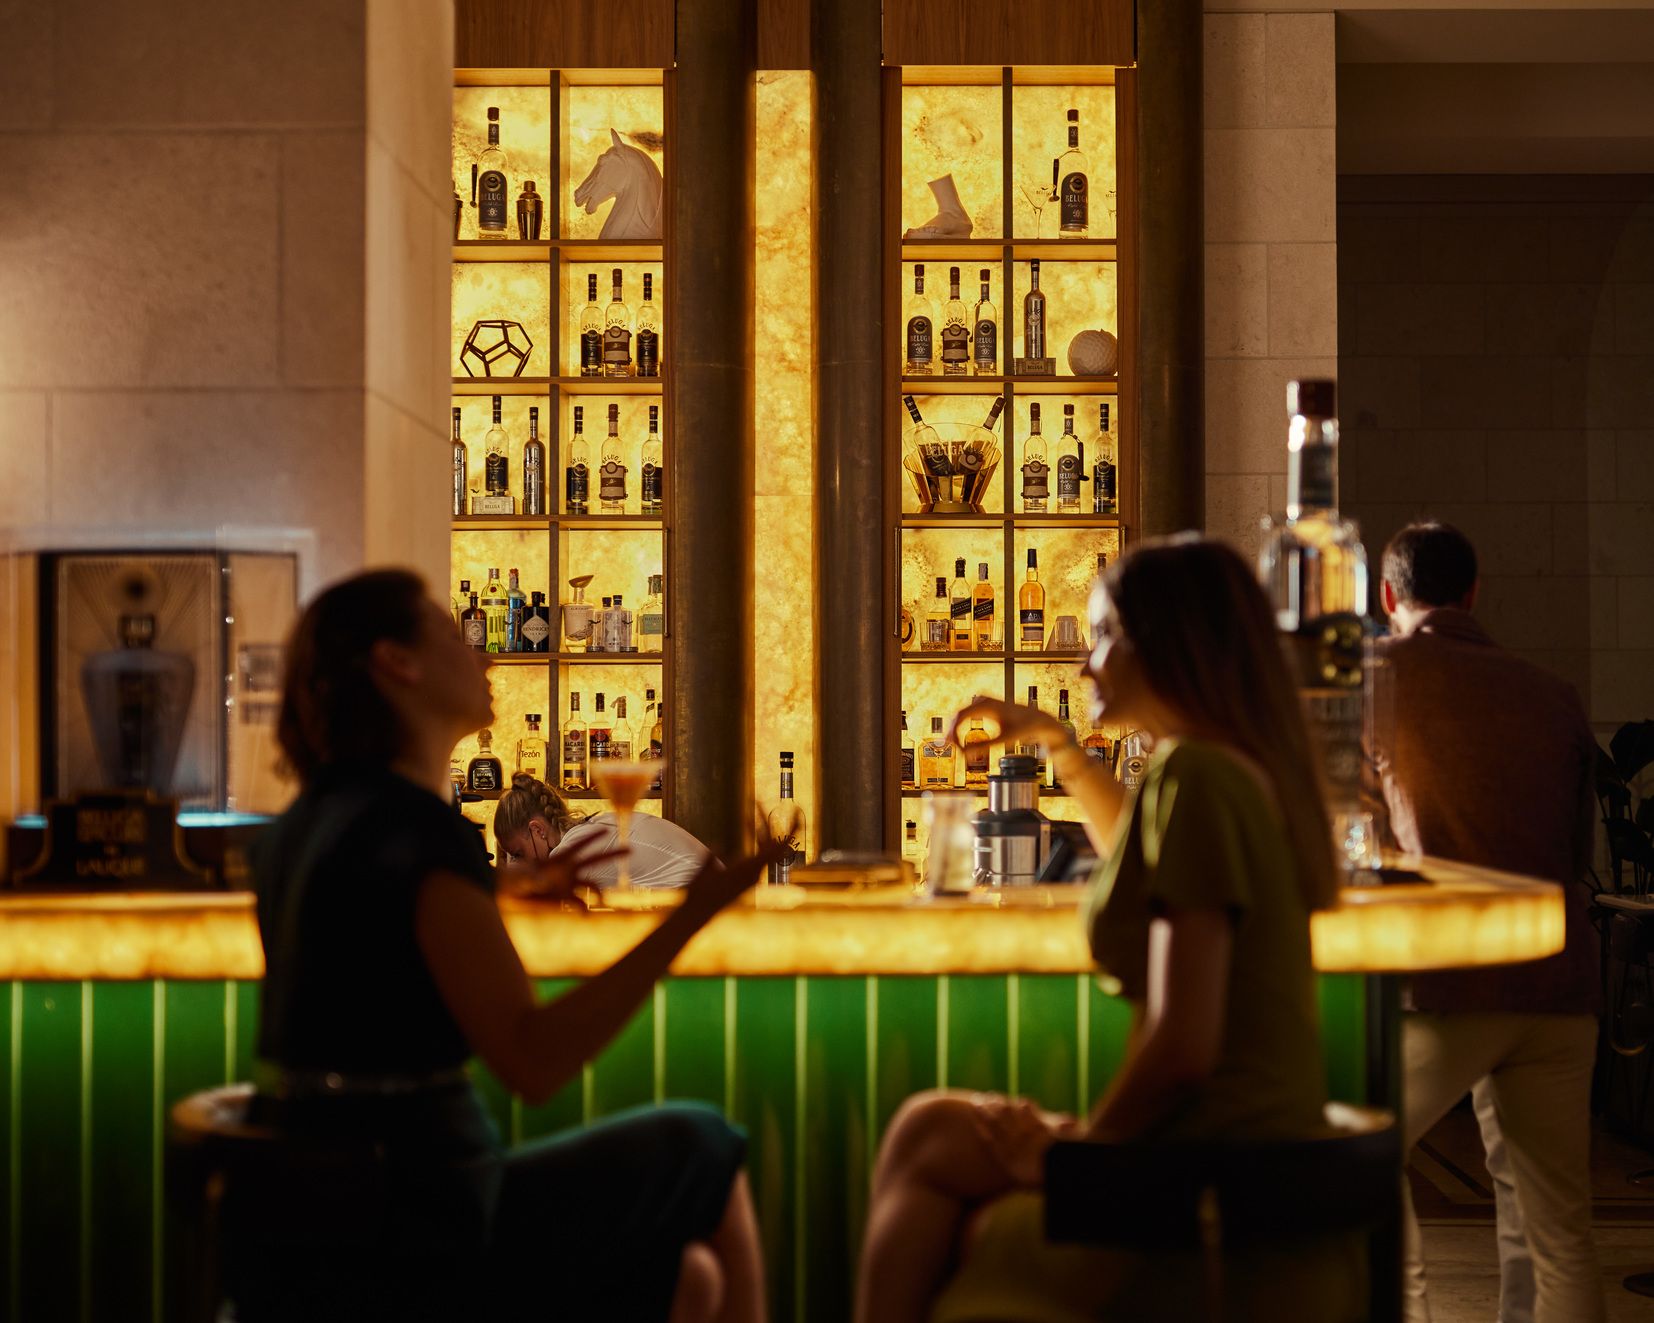 Summer nights are better in our Onyx Bar